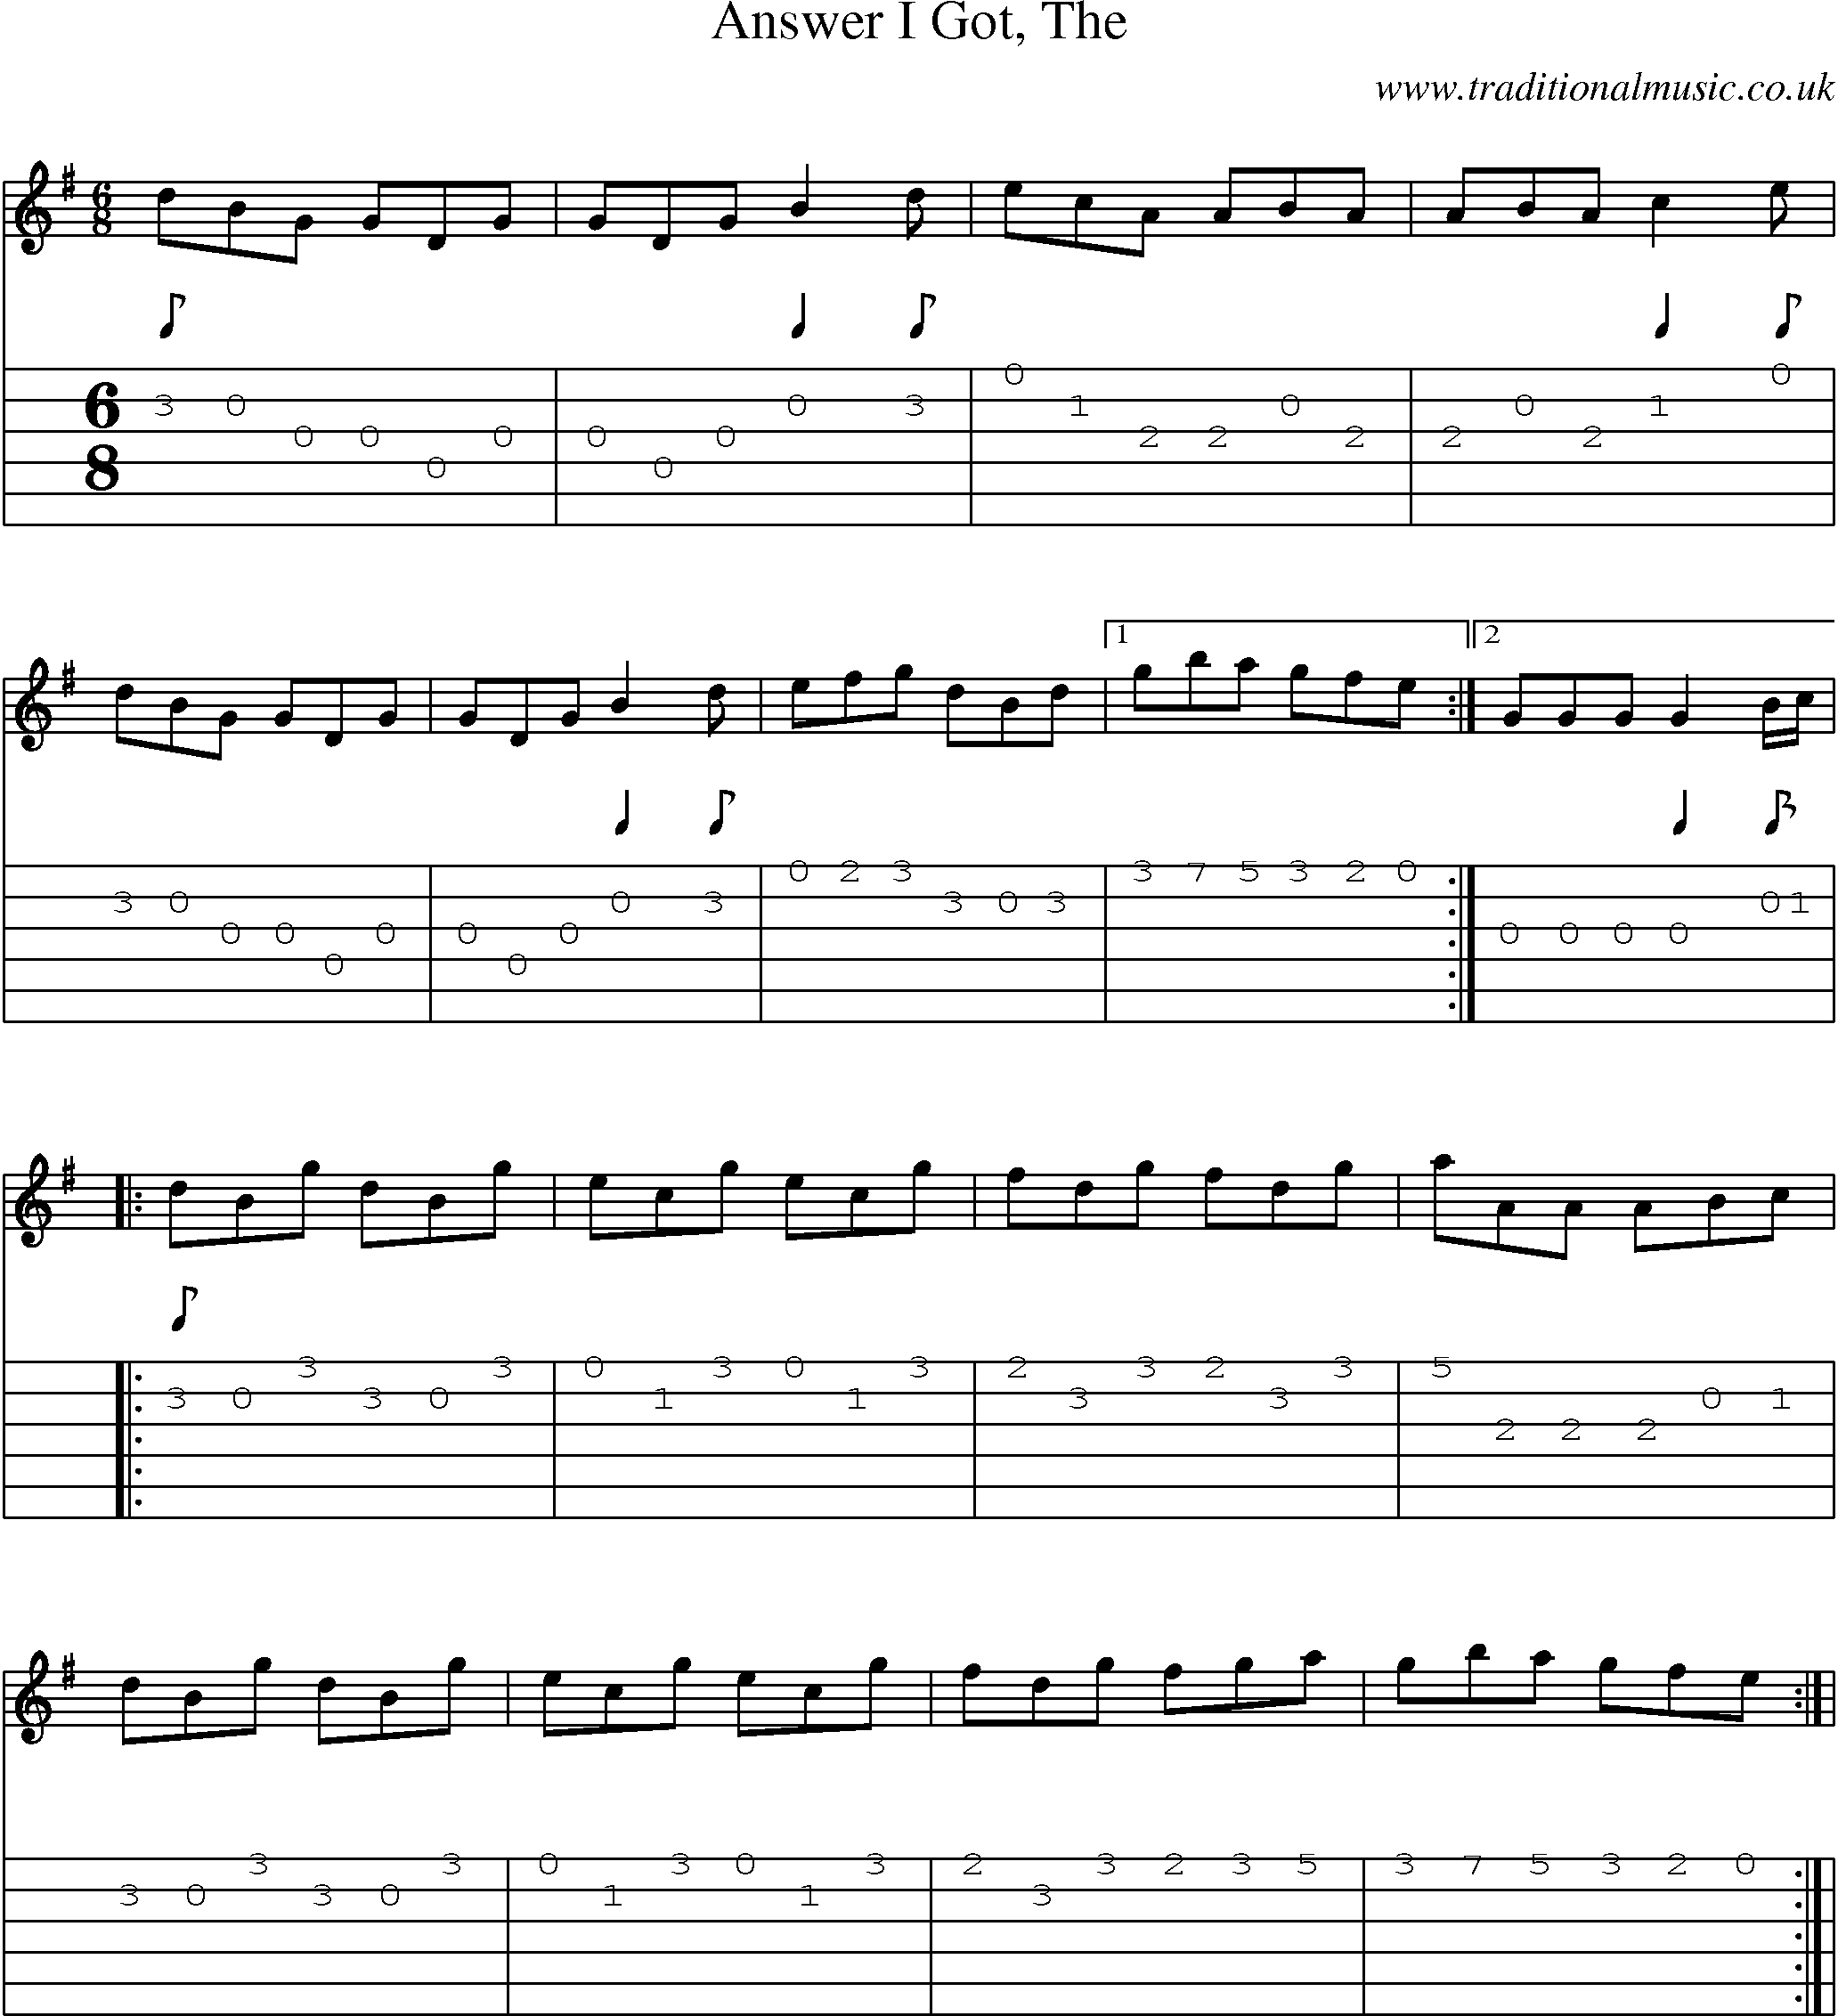 Music Score and Guitar Tabs for Answer I Got